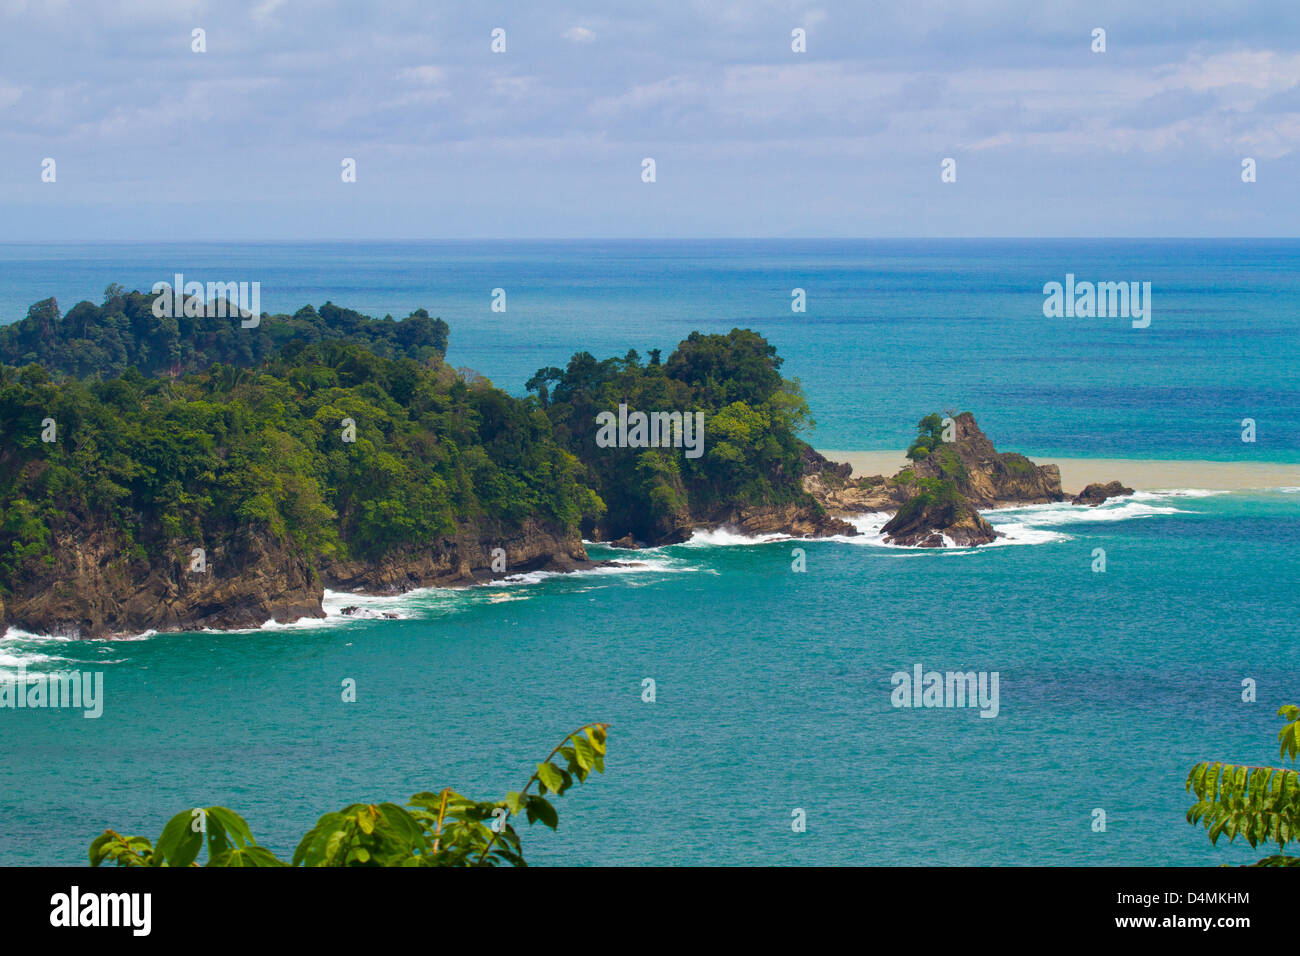 Peninsula with cliffs, tropical trees and lush vegetation Stock Photo